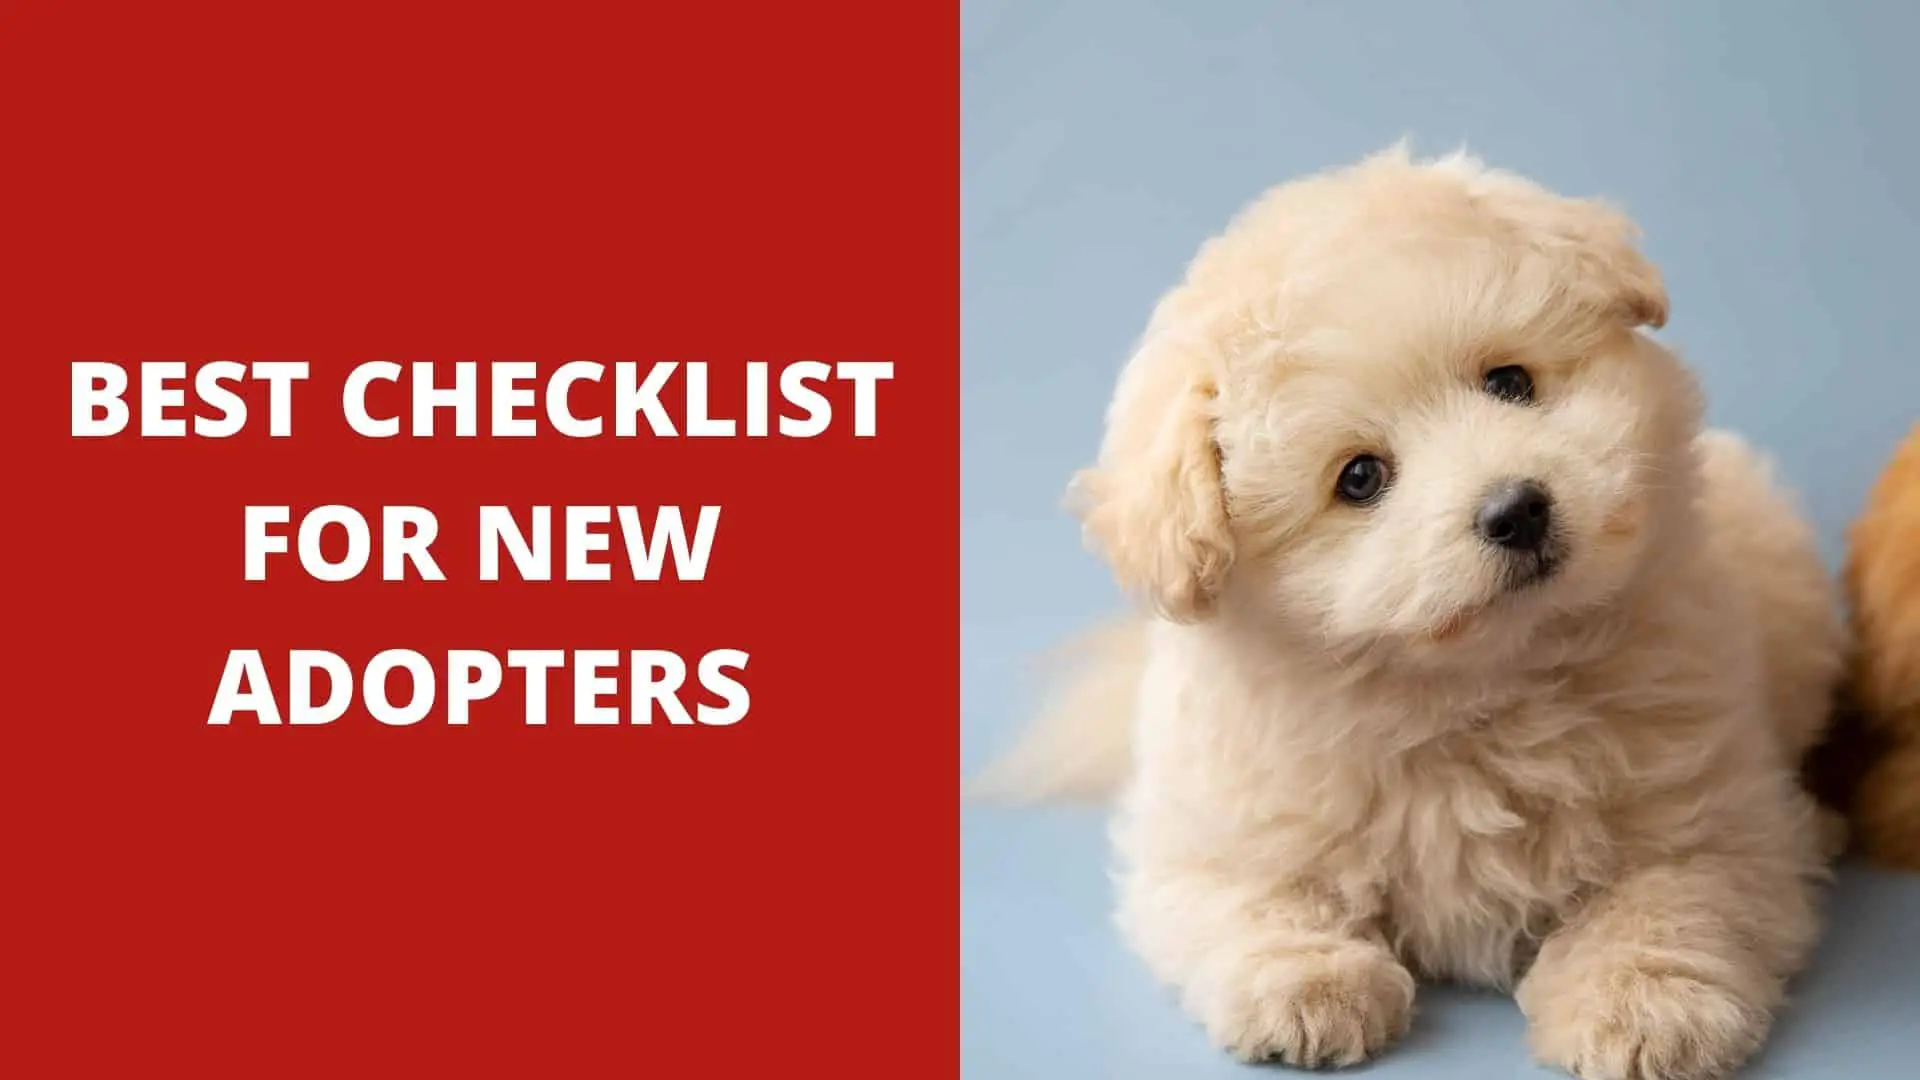 Best Checklist For New Adopters 2022